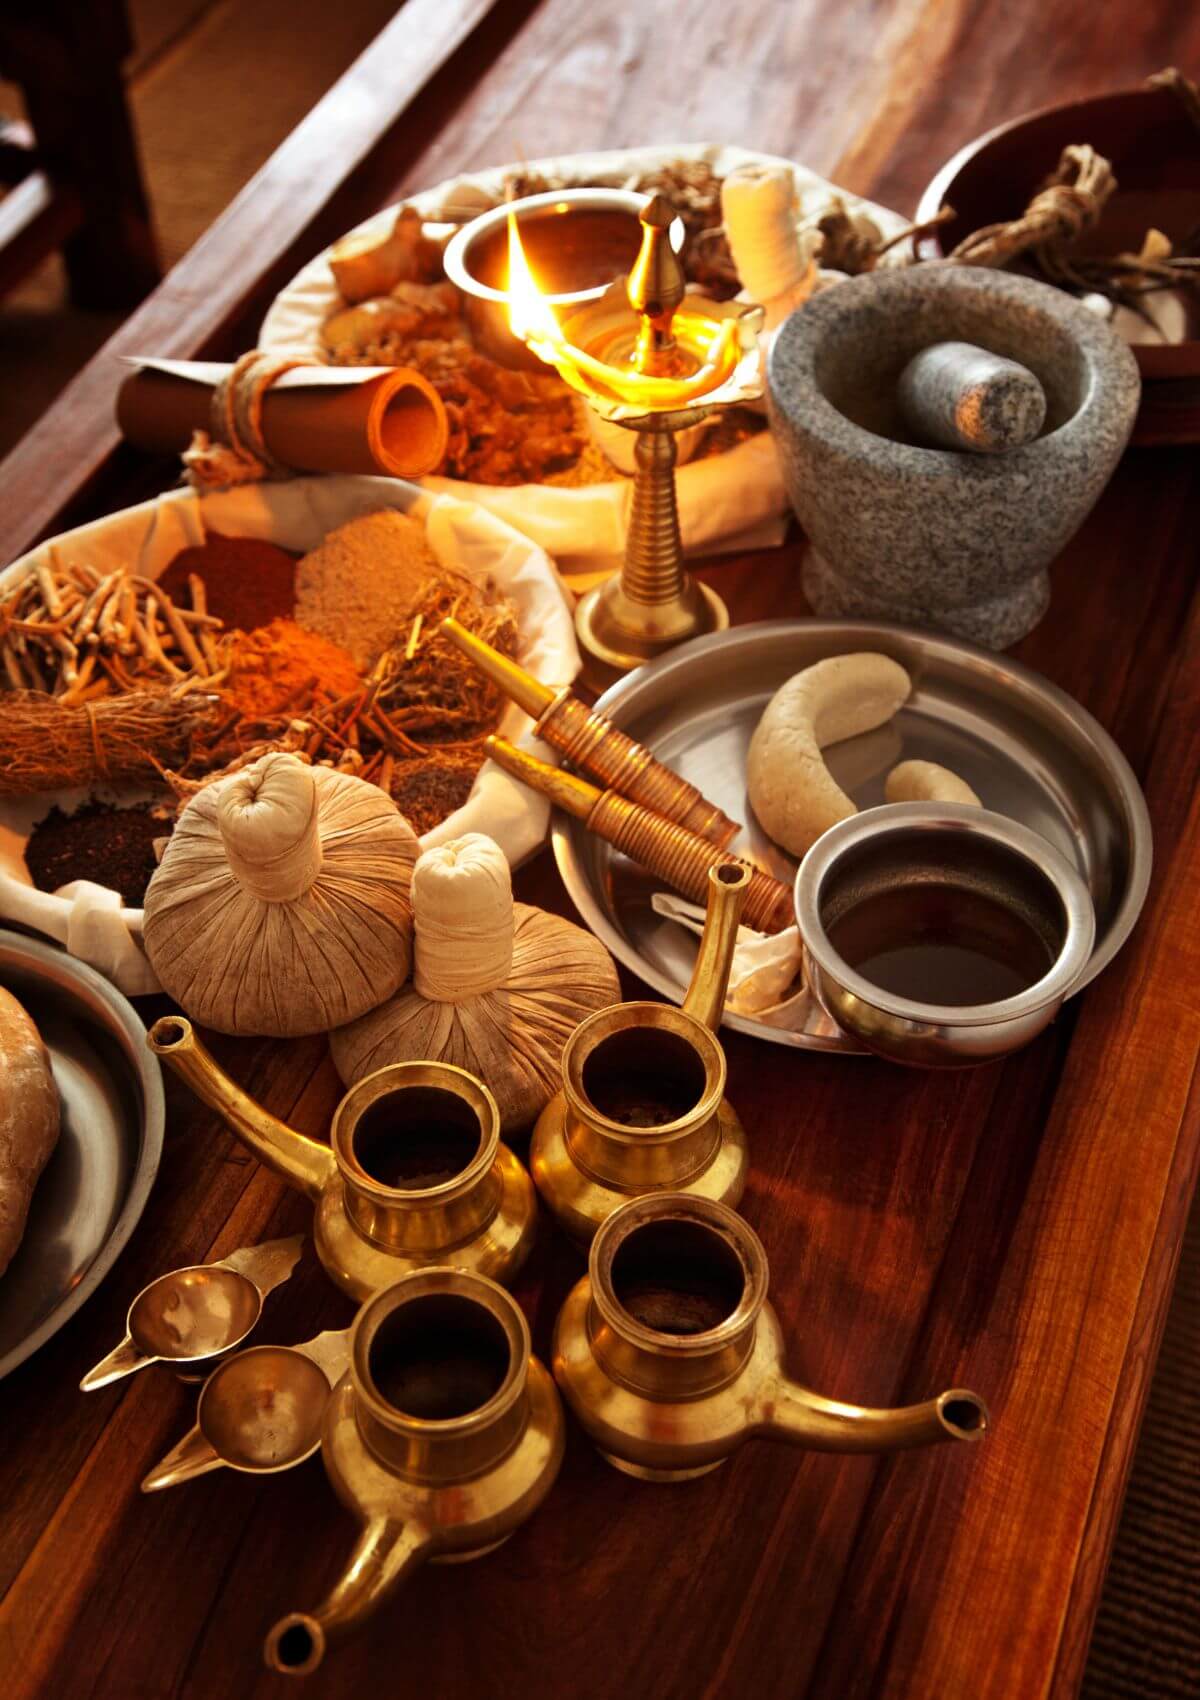 Ayurveda products make excellent souvenirs from India